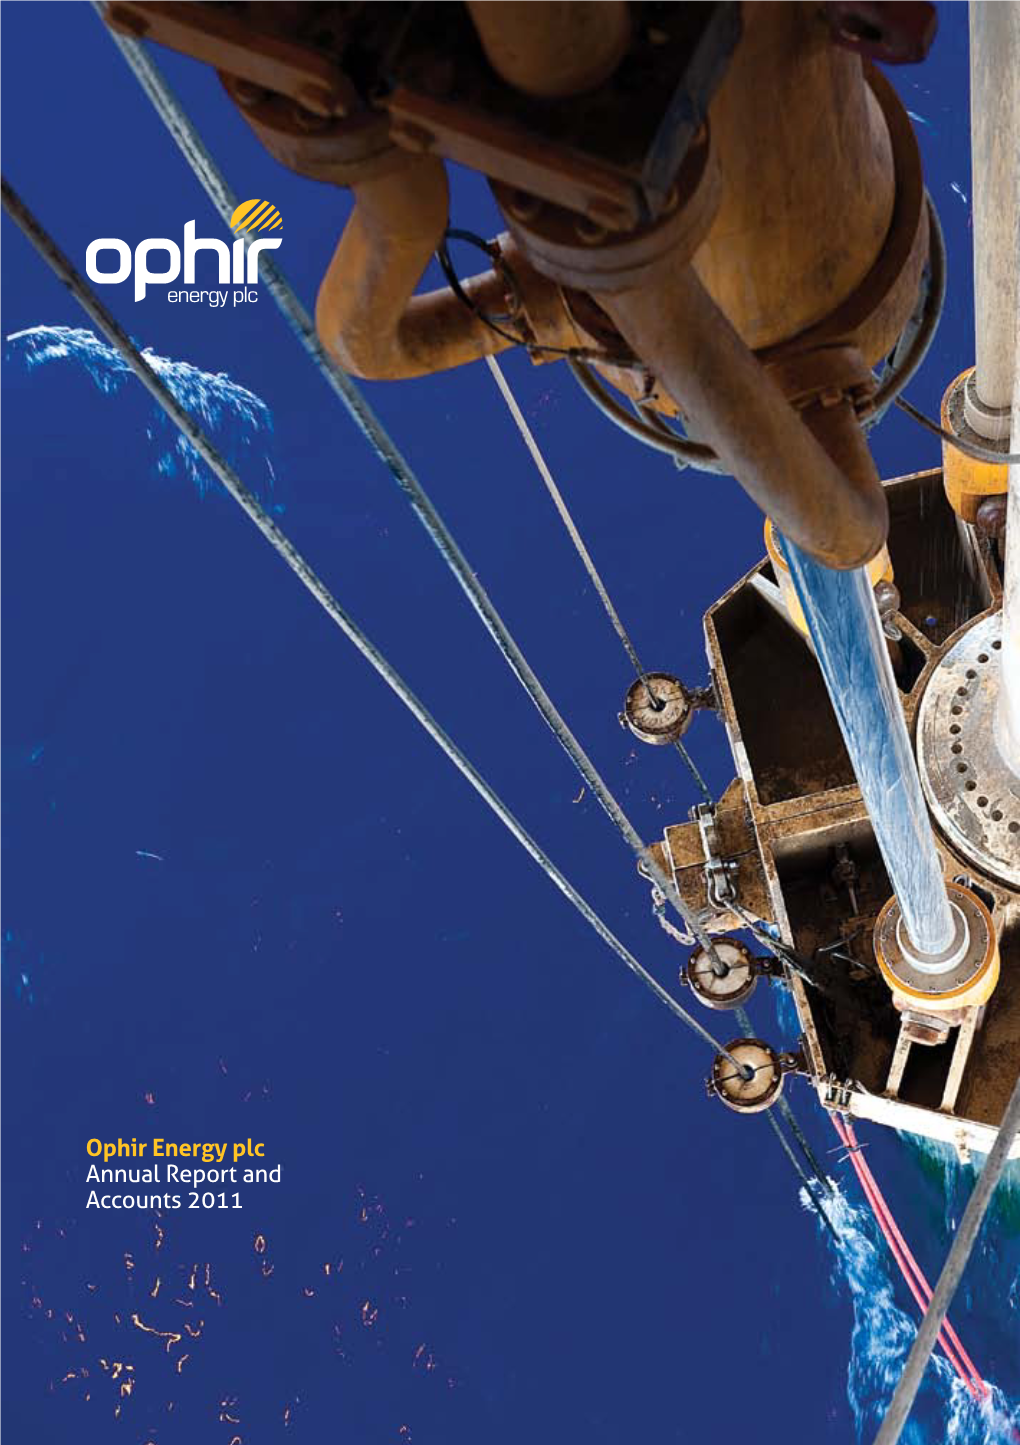 Ophir Energy Plc Annual Report and Accounts 2011